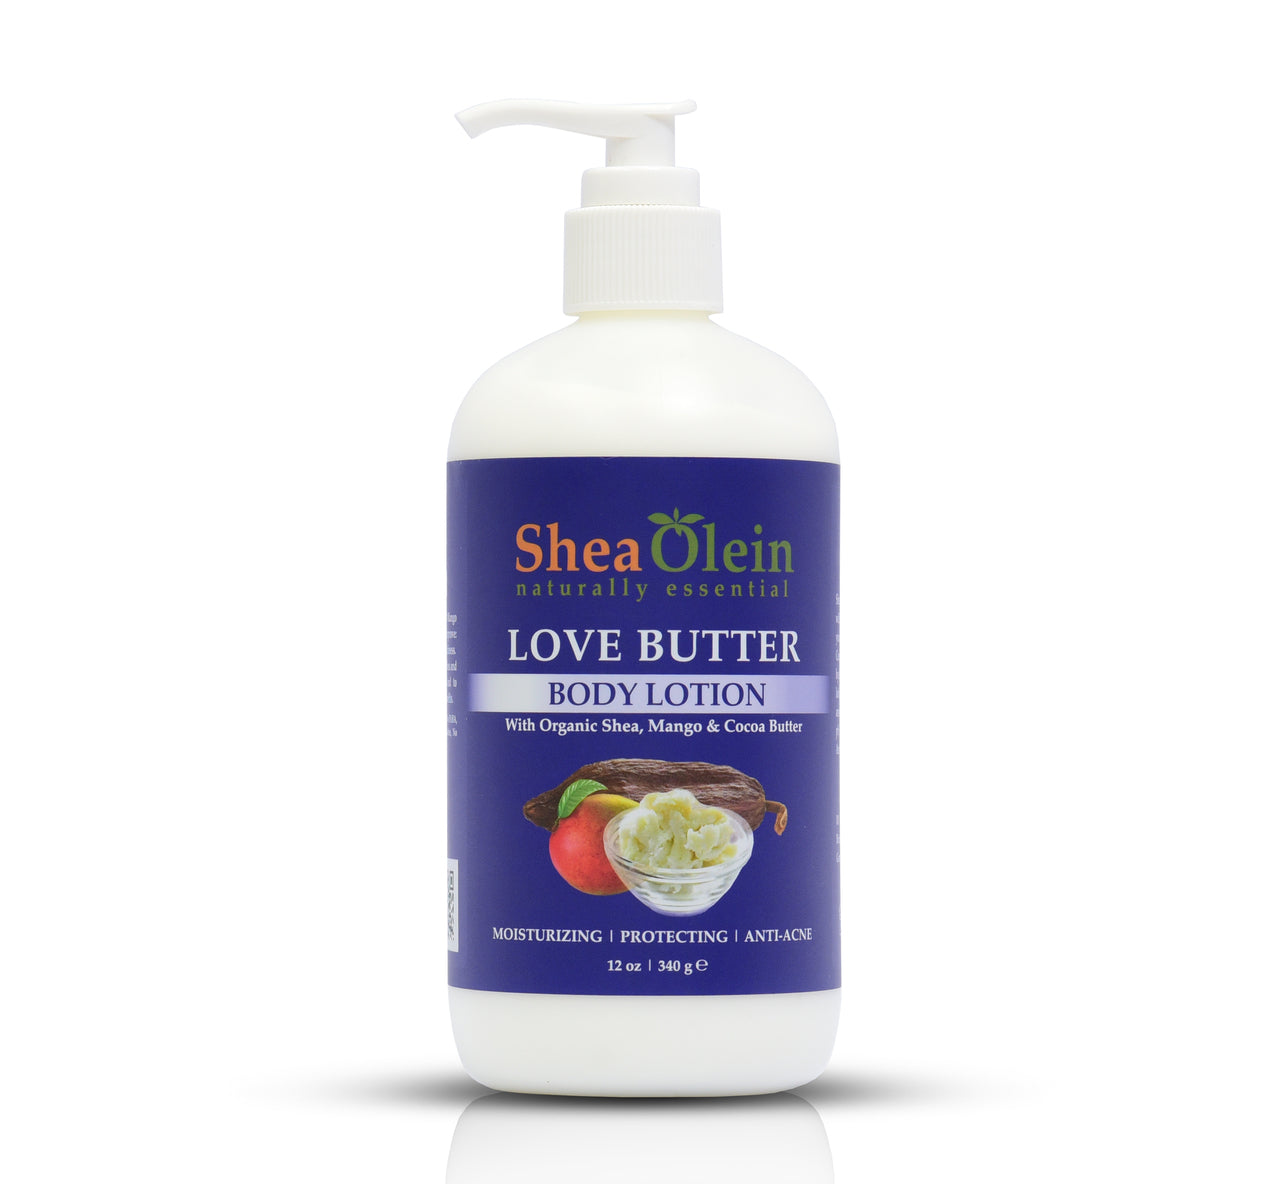 Love Butter Body Lotion with Shea, Mango & Cocoa Butter 12oz